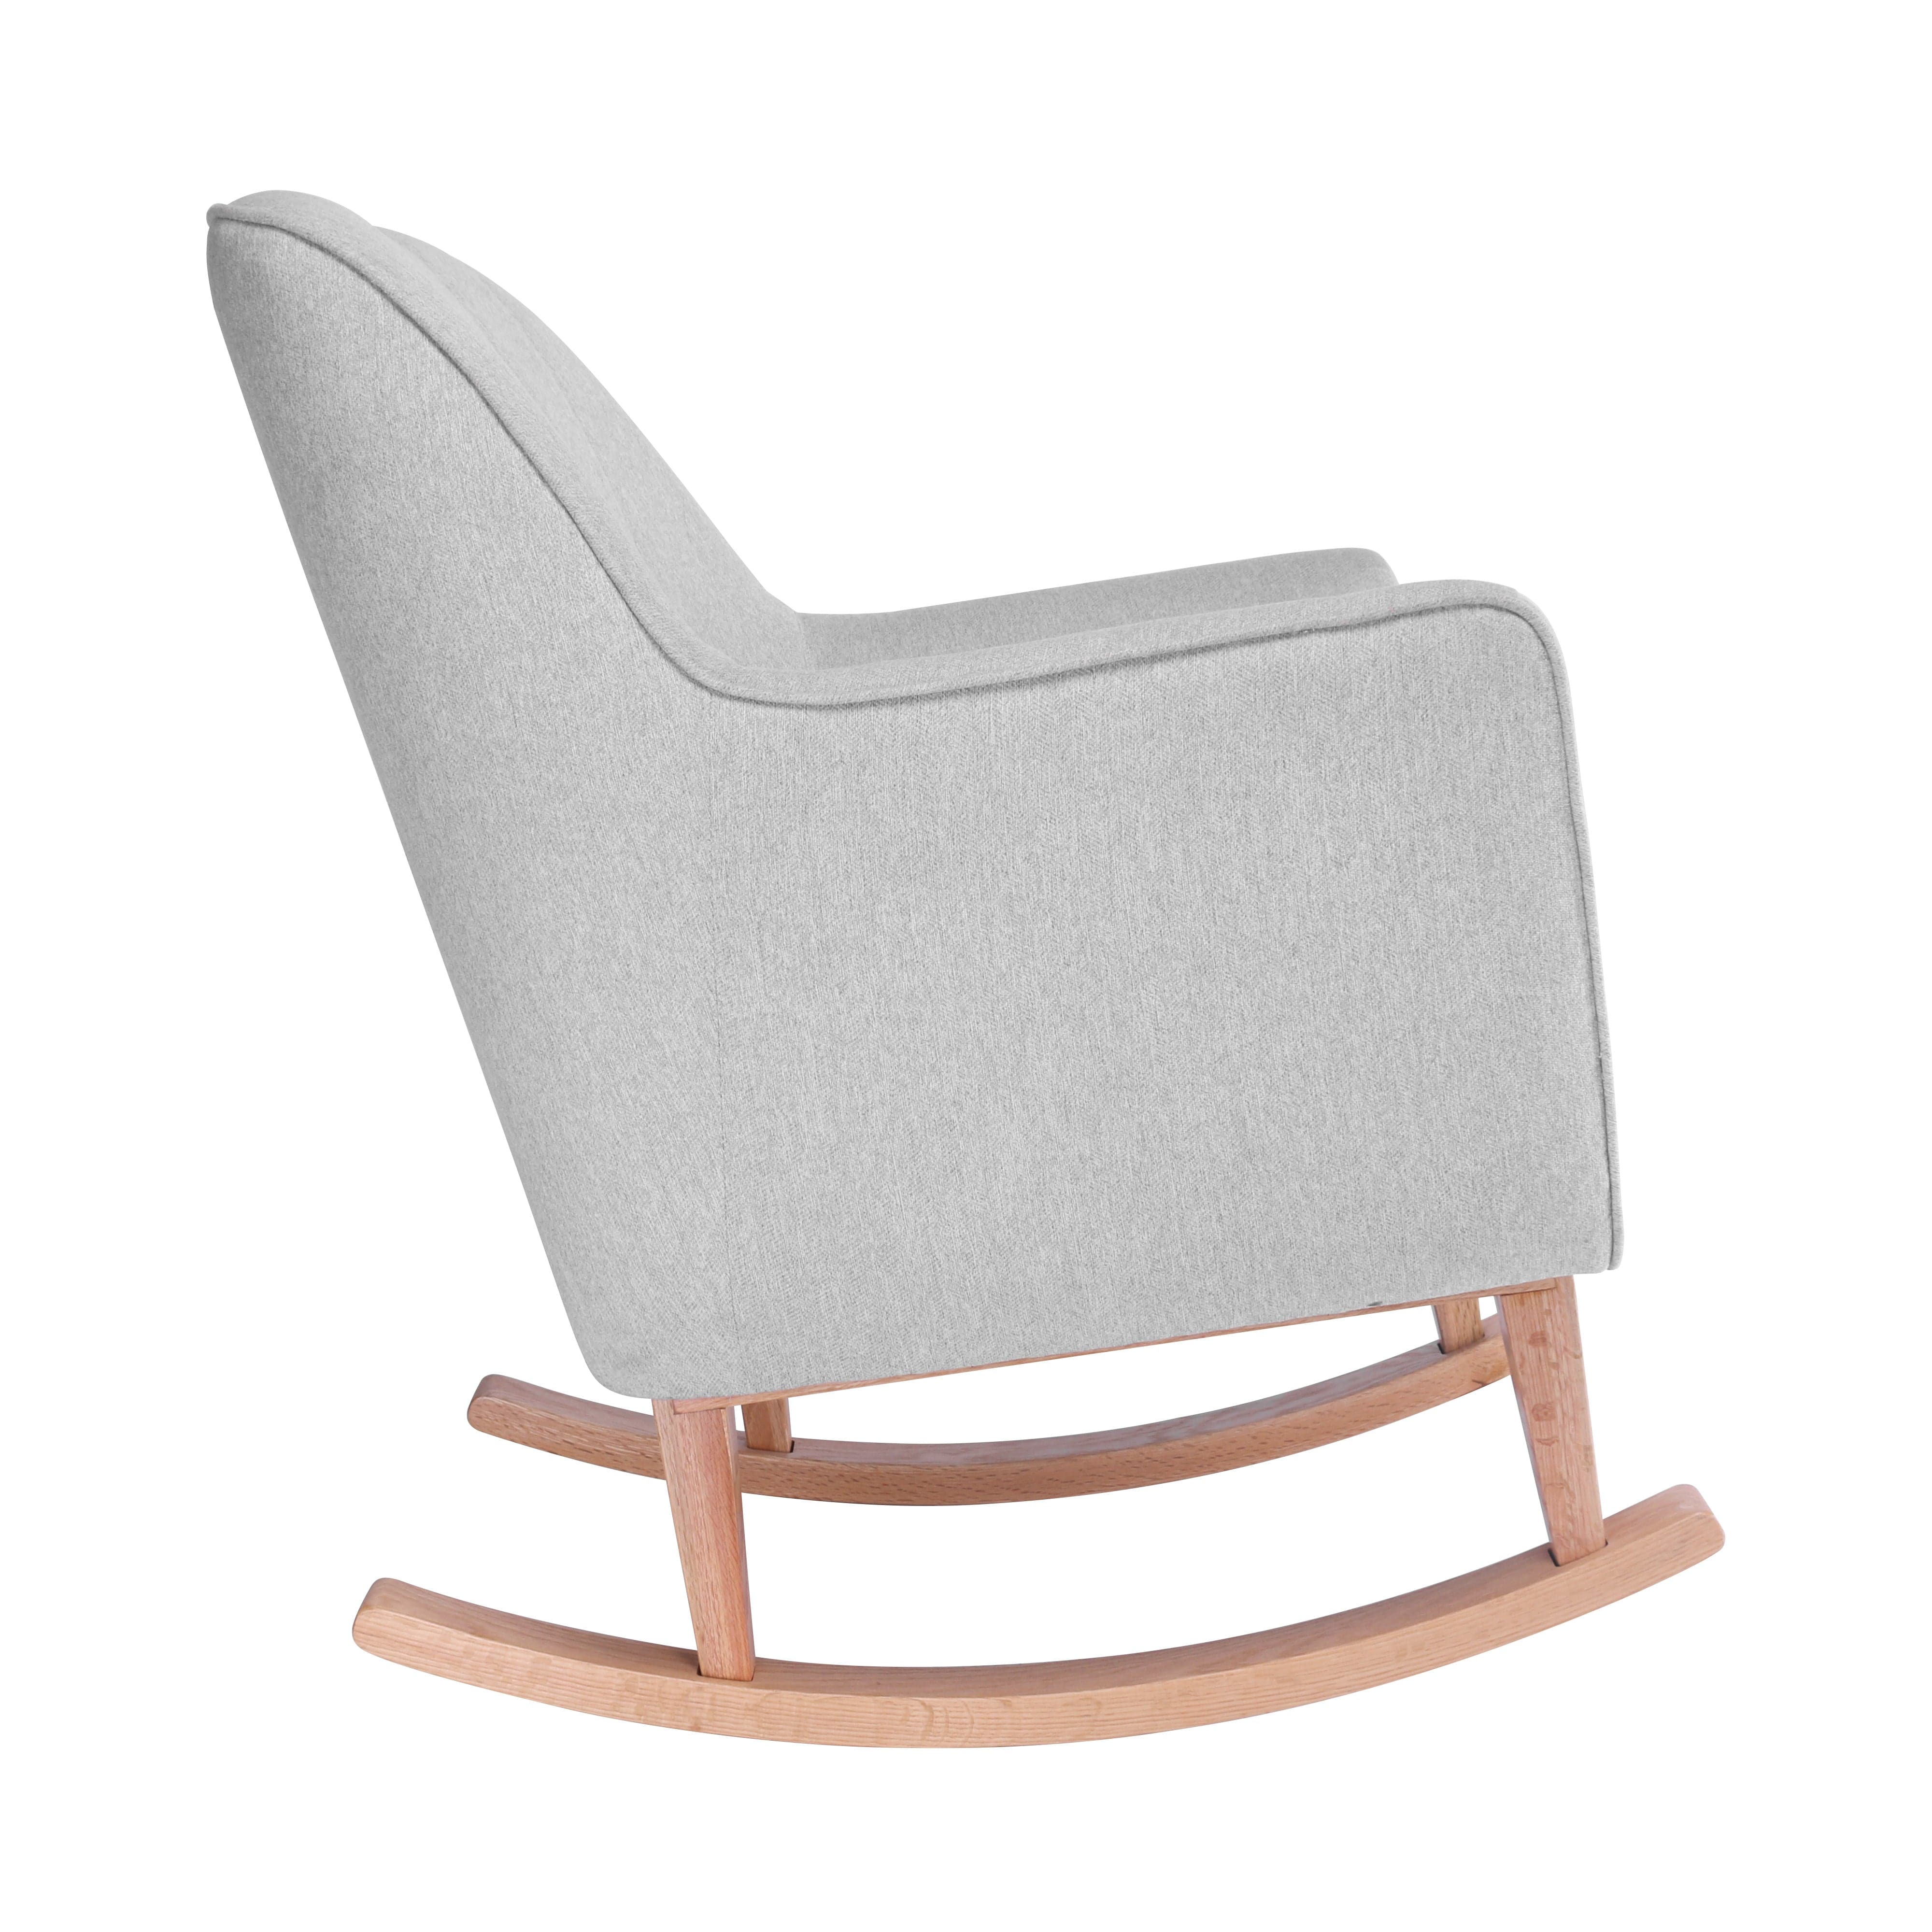 Tutti Bambini Noah Rocking Chair - Pebble/Grey - For Your Little One